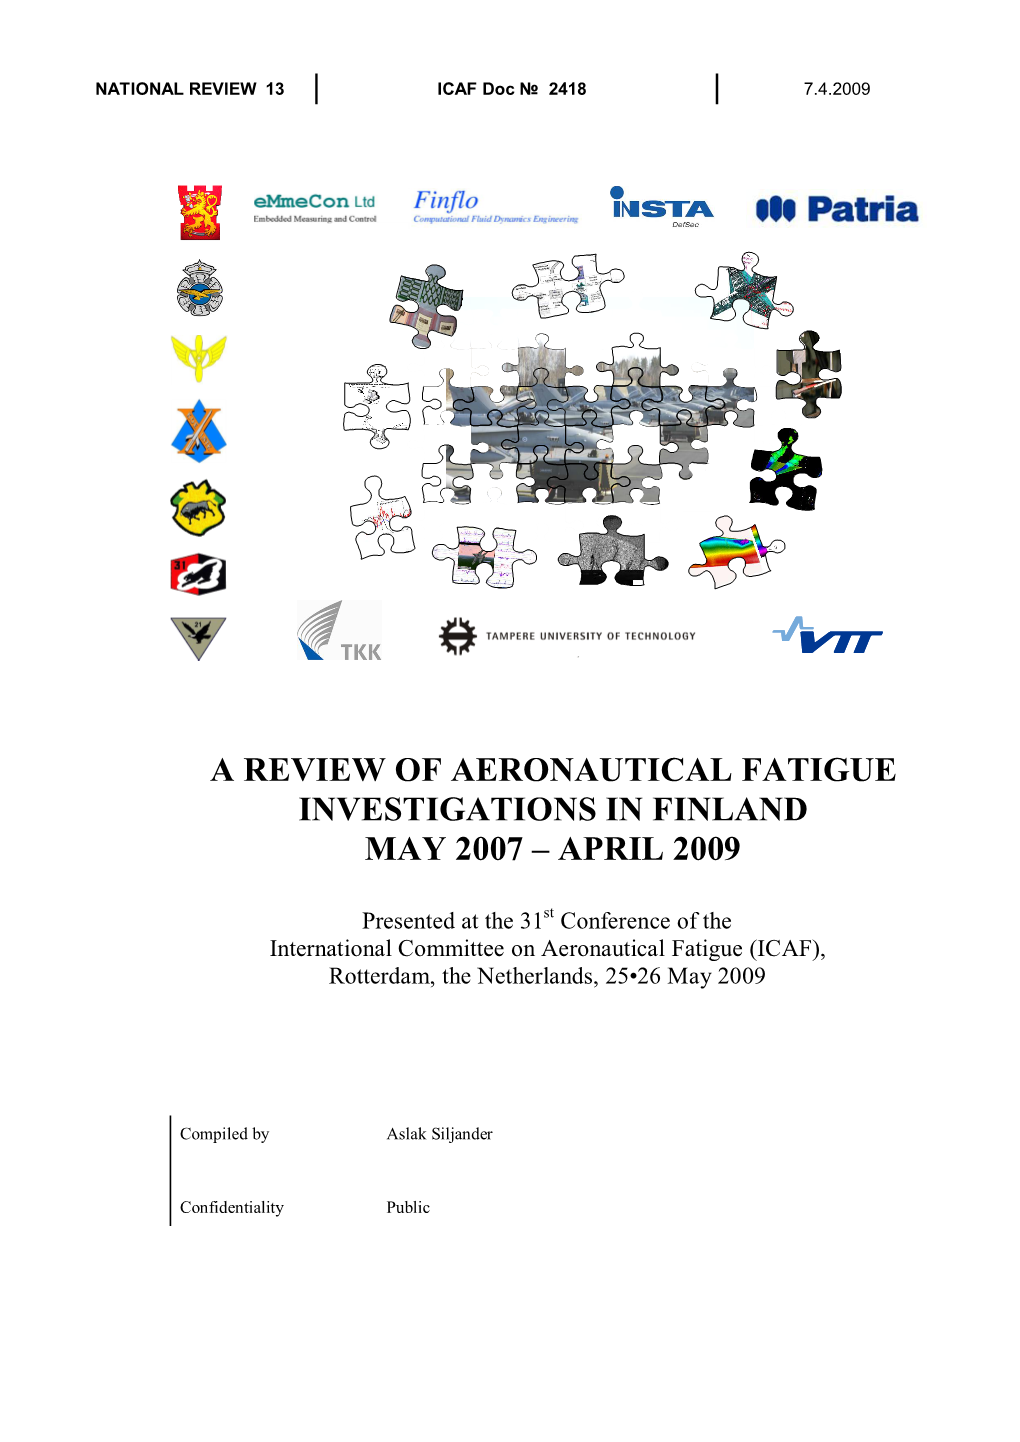 A Review of Aeronautical Fatigue Investigations in Finland May 2007 – April 2009